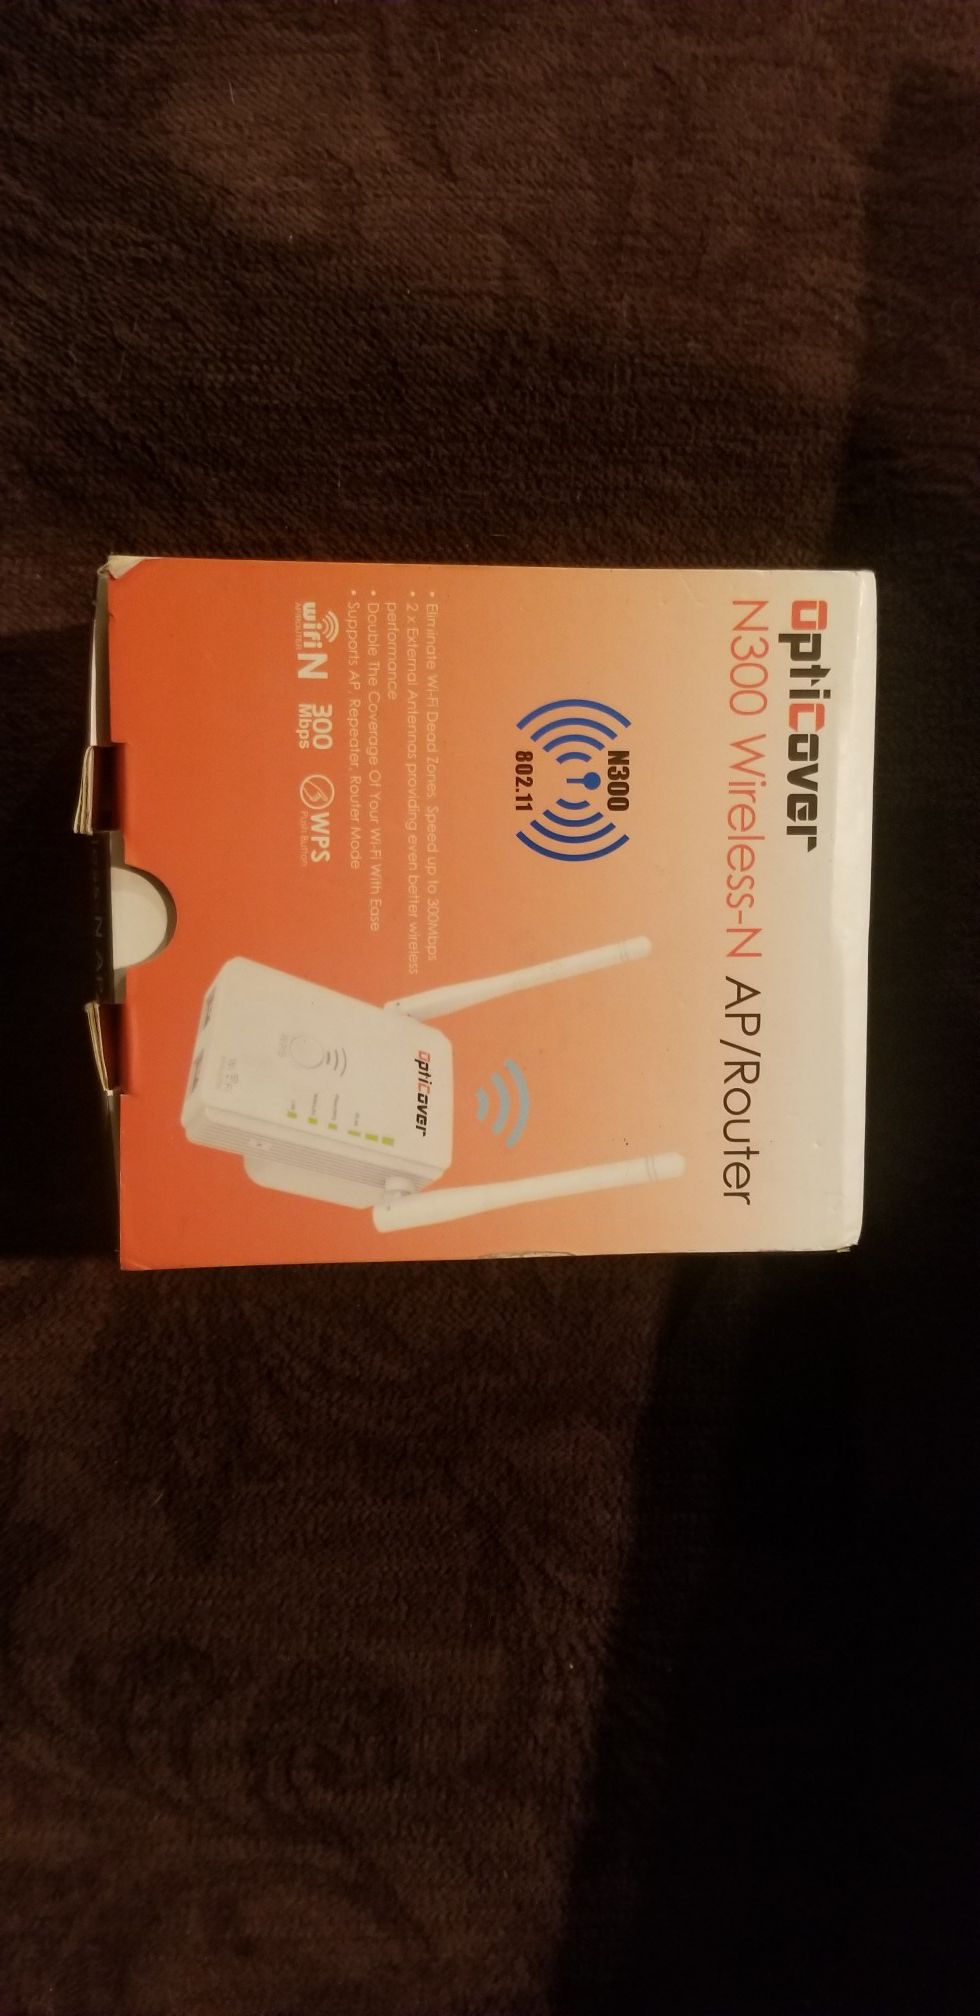 Ap router 300 mps wifi access point